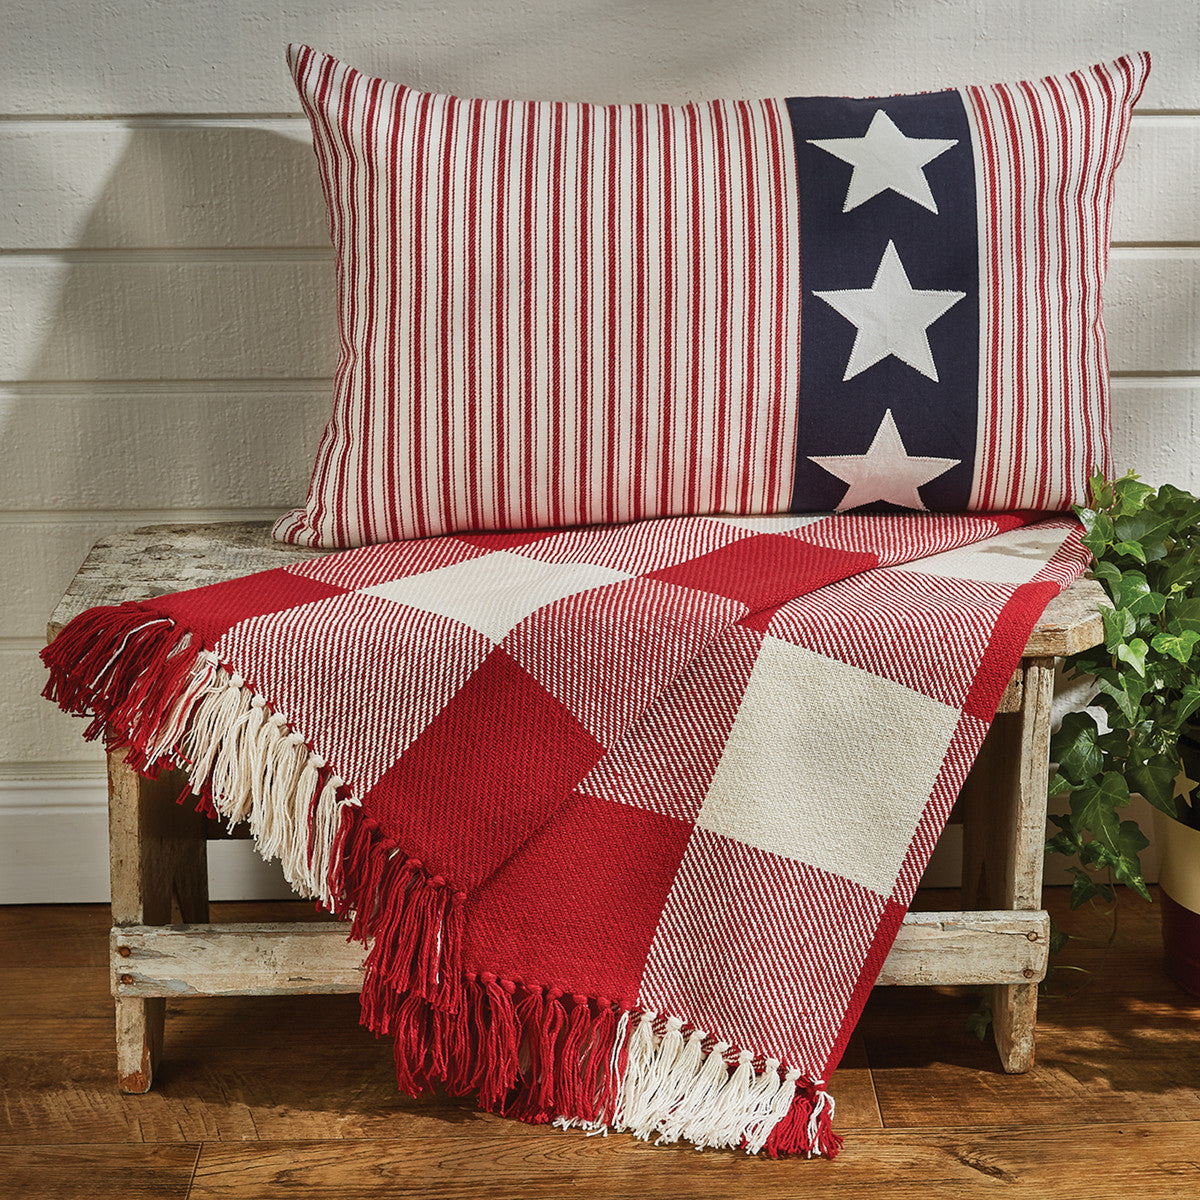 Wicklow Check Throw - Red & Cream Park Designs